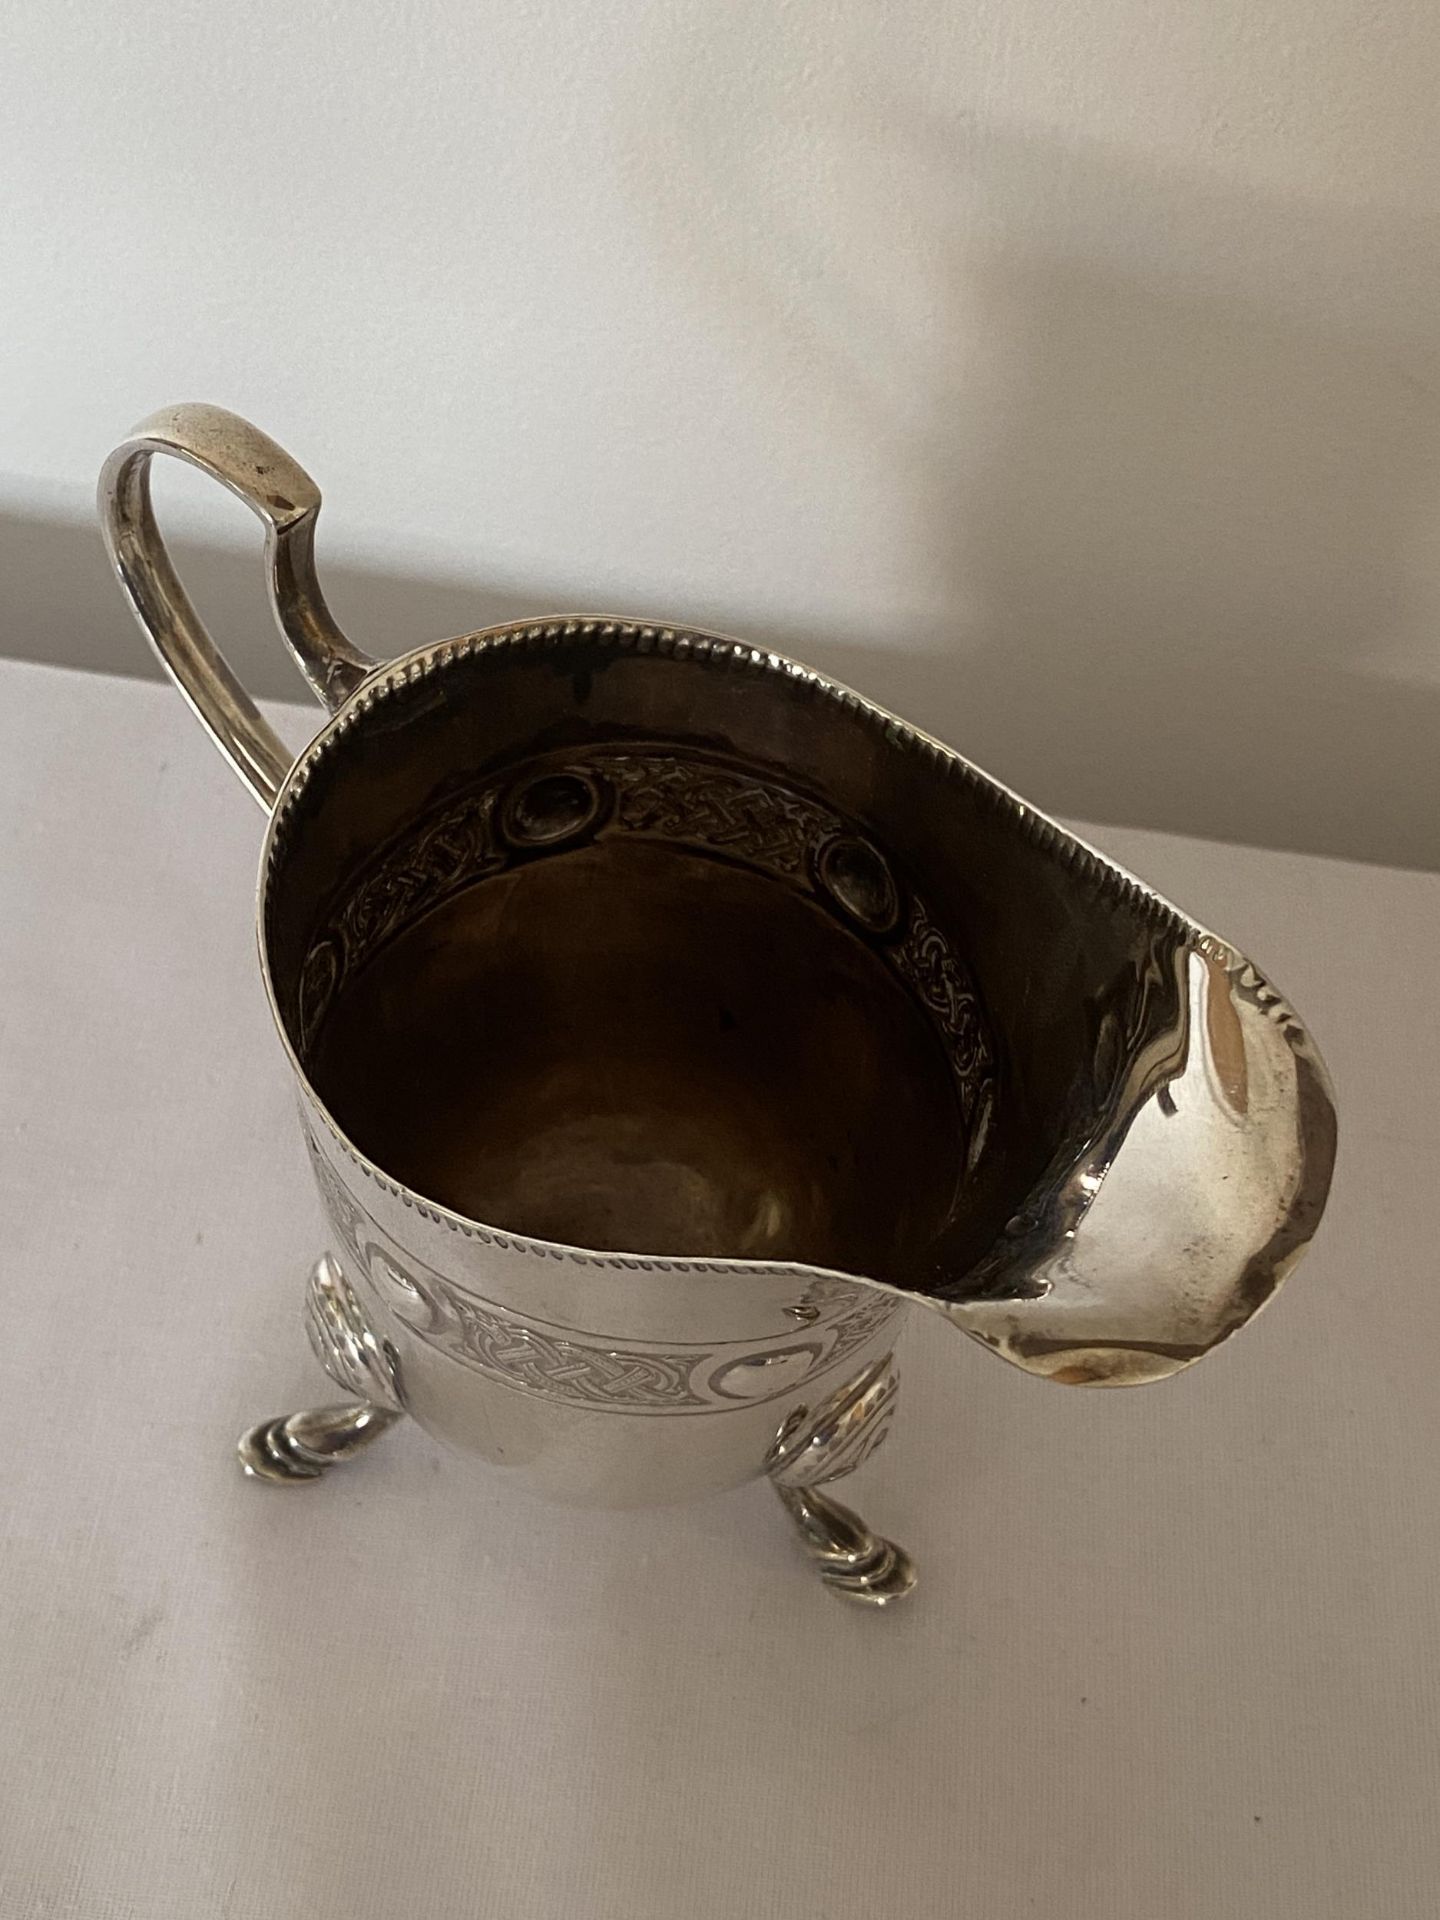 A GEORGE V 1917 HALLMARKED DUBLIN SILVER TANKARD, MAKER T WEIR & SONS, GROSS WEIGHT 163 GRAMS - Image 9 of 12